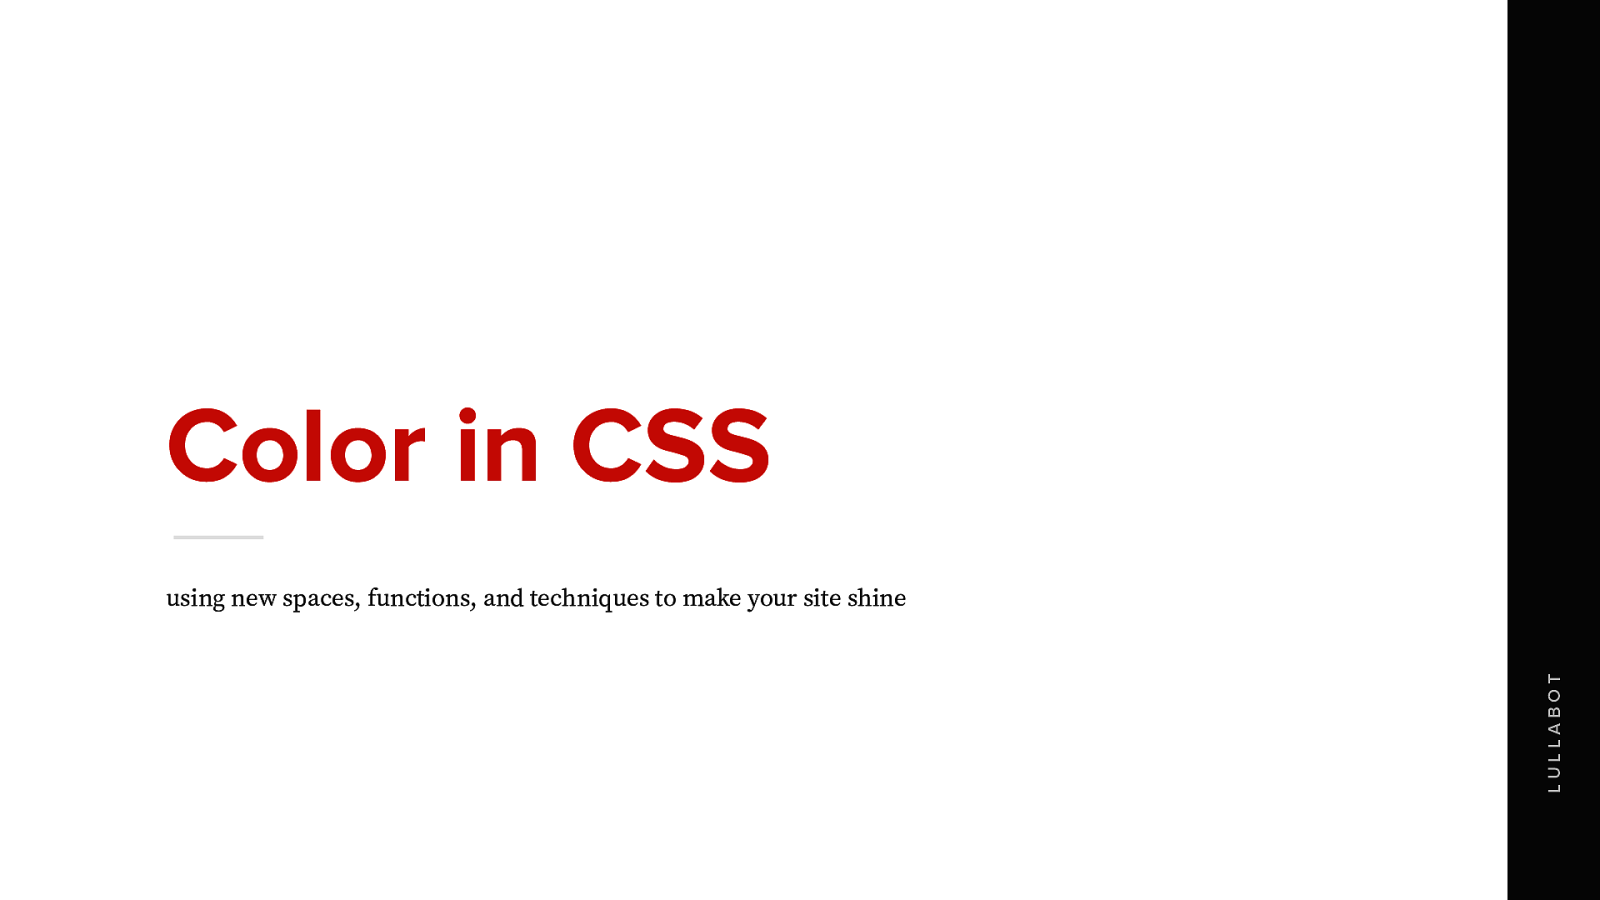 Color in CSS: Using New Spaces, Functions, and Techniques to Make your Site Shine